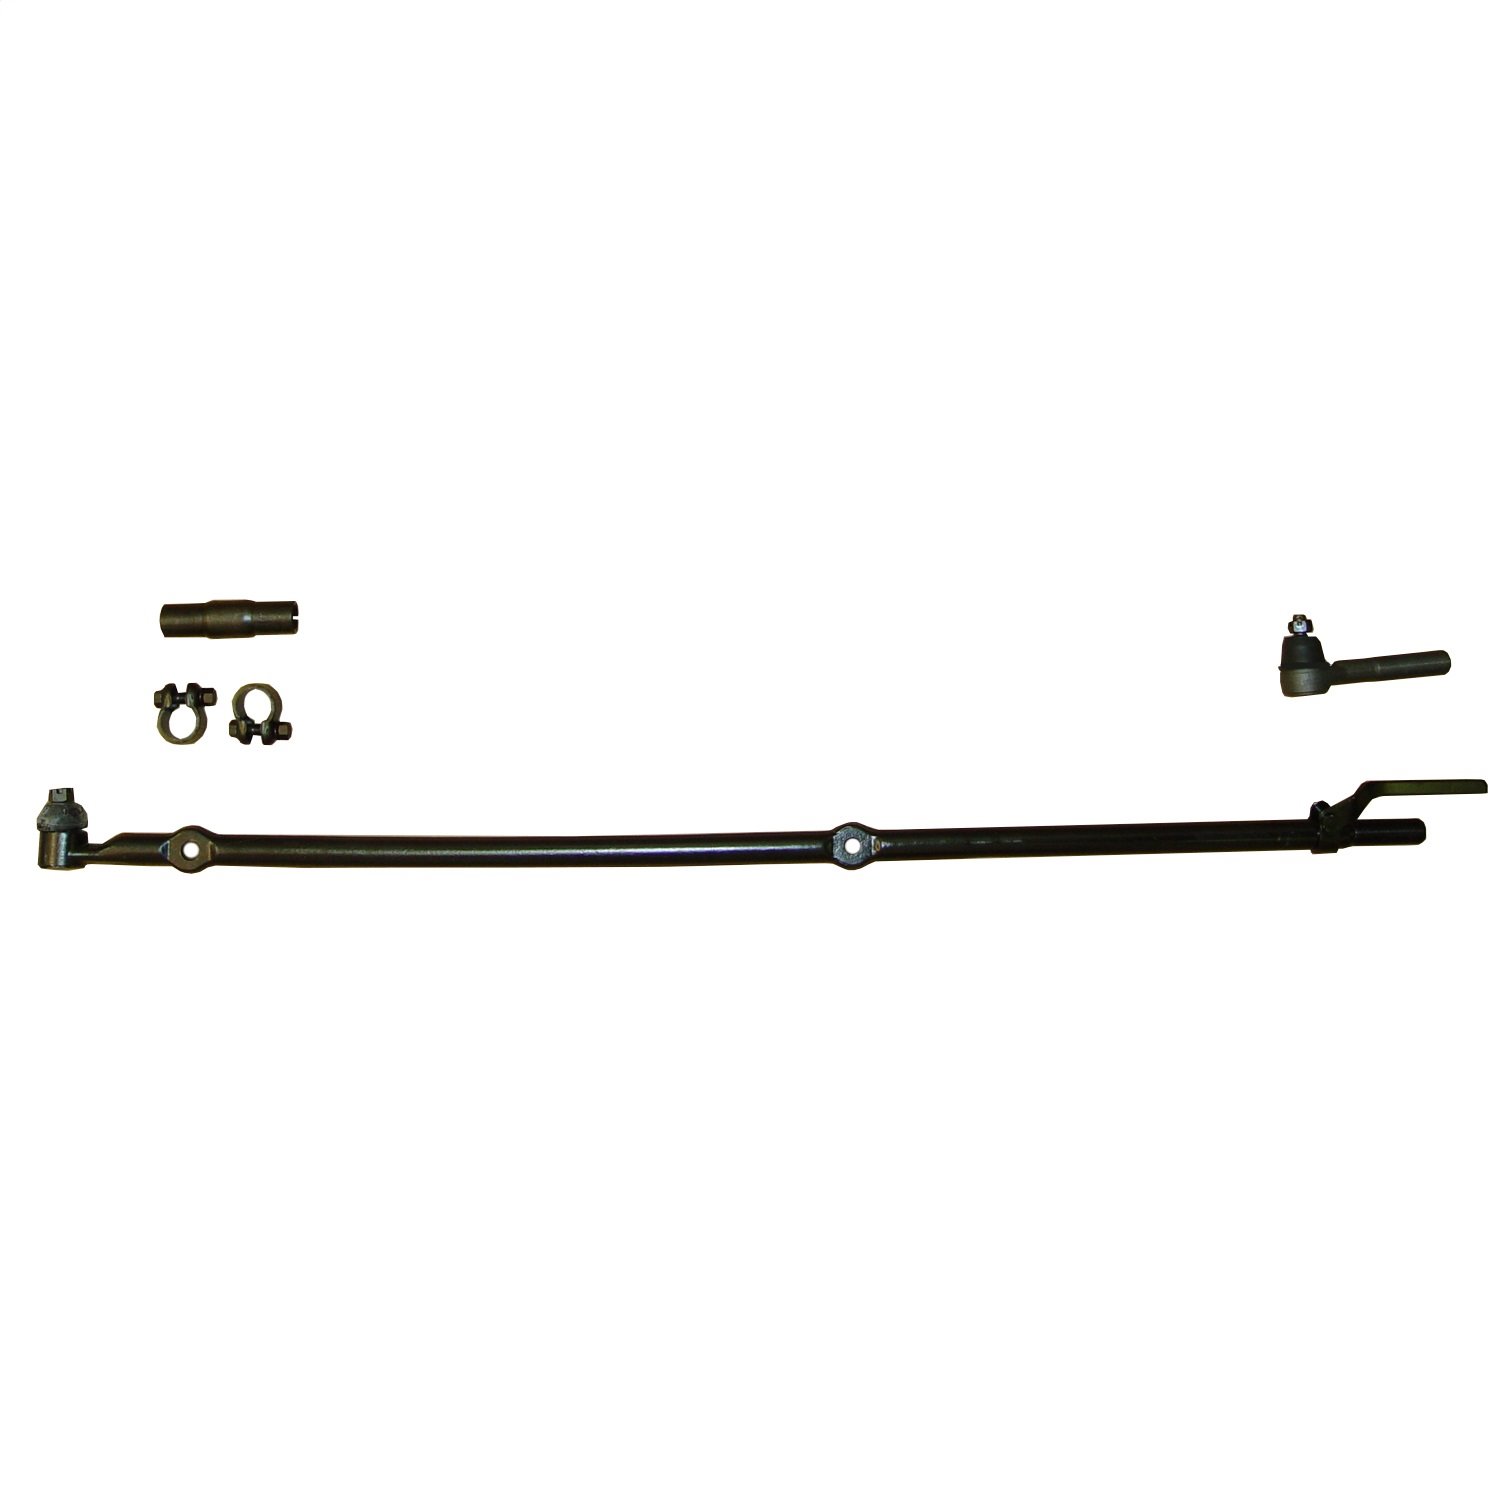 Stock replacement tie rod assembly from Omix-ADA, Fits 91-95 Jeep Wrangler YJIt includes